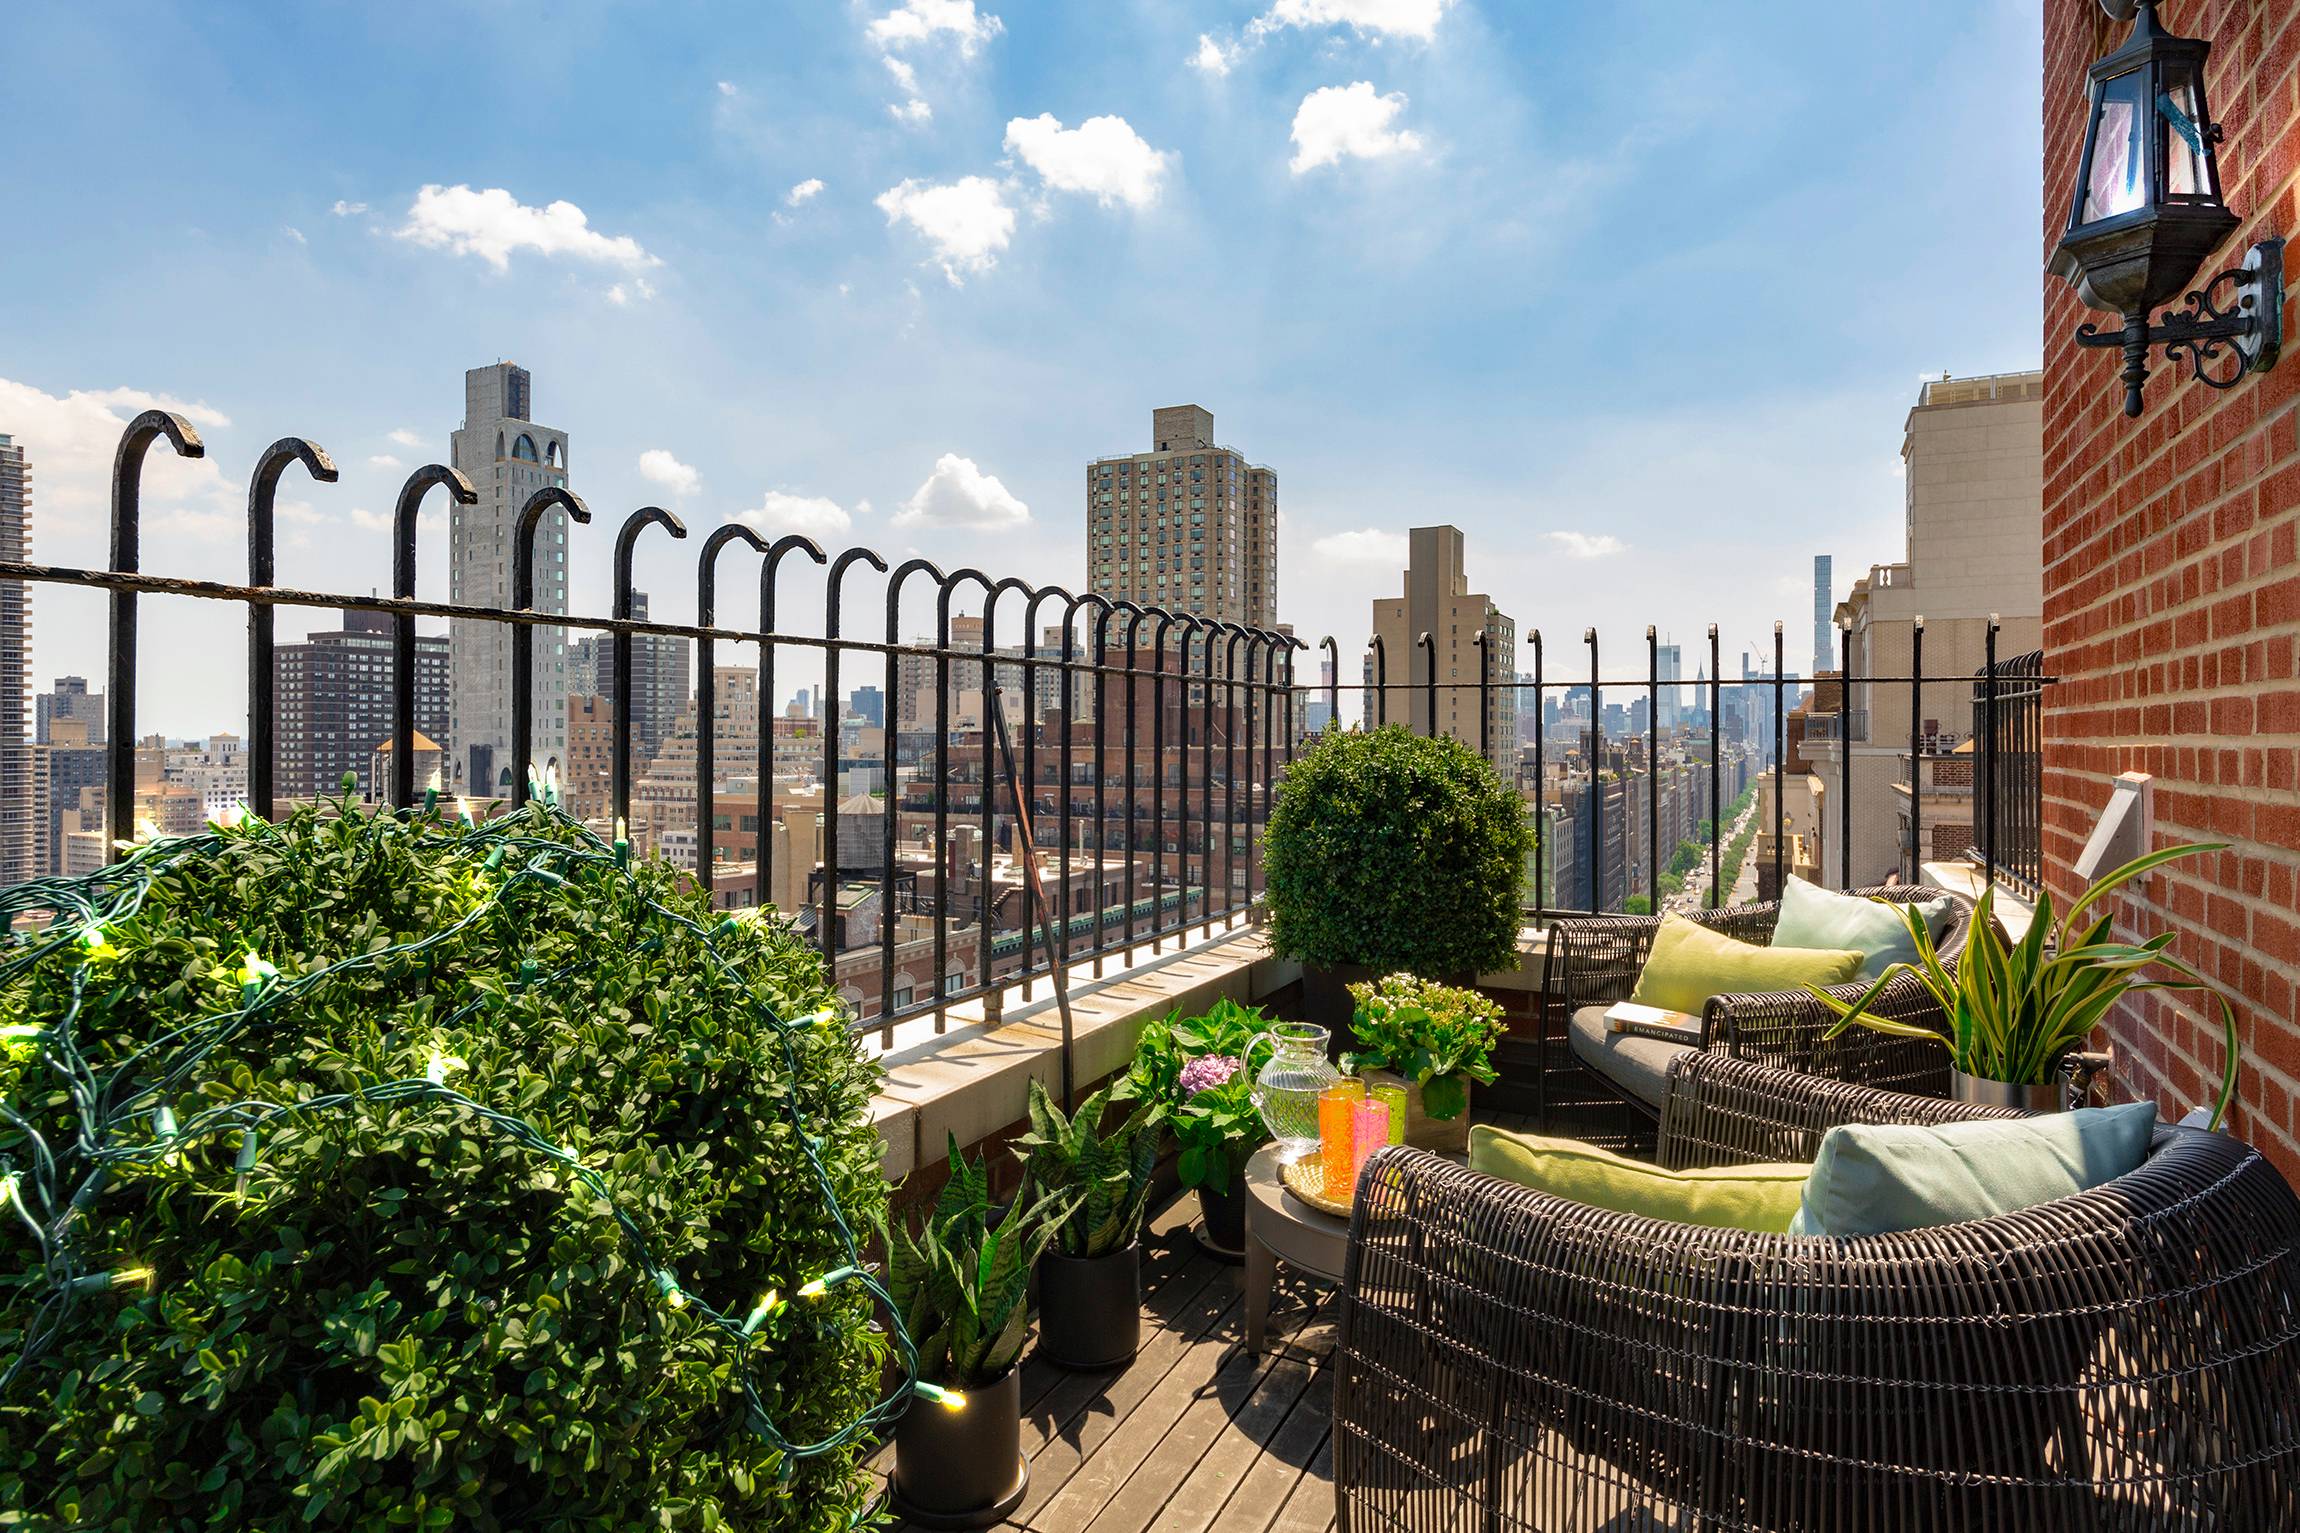 MULTI TERRACED PARK AVENUE DUPLEX WITH UNRIVALED VIEWS This distinguished and masterfully renovated five bedroom, five bath plus powder room duplex residence showcases commanding views of Central Park, the East ...